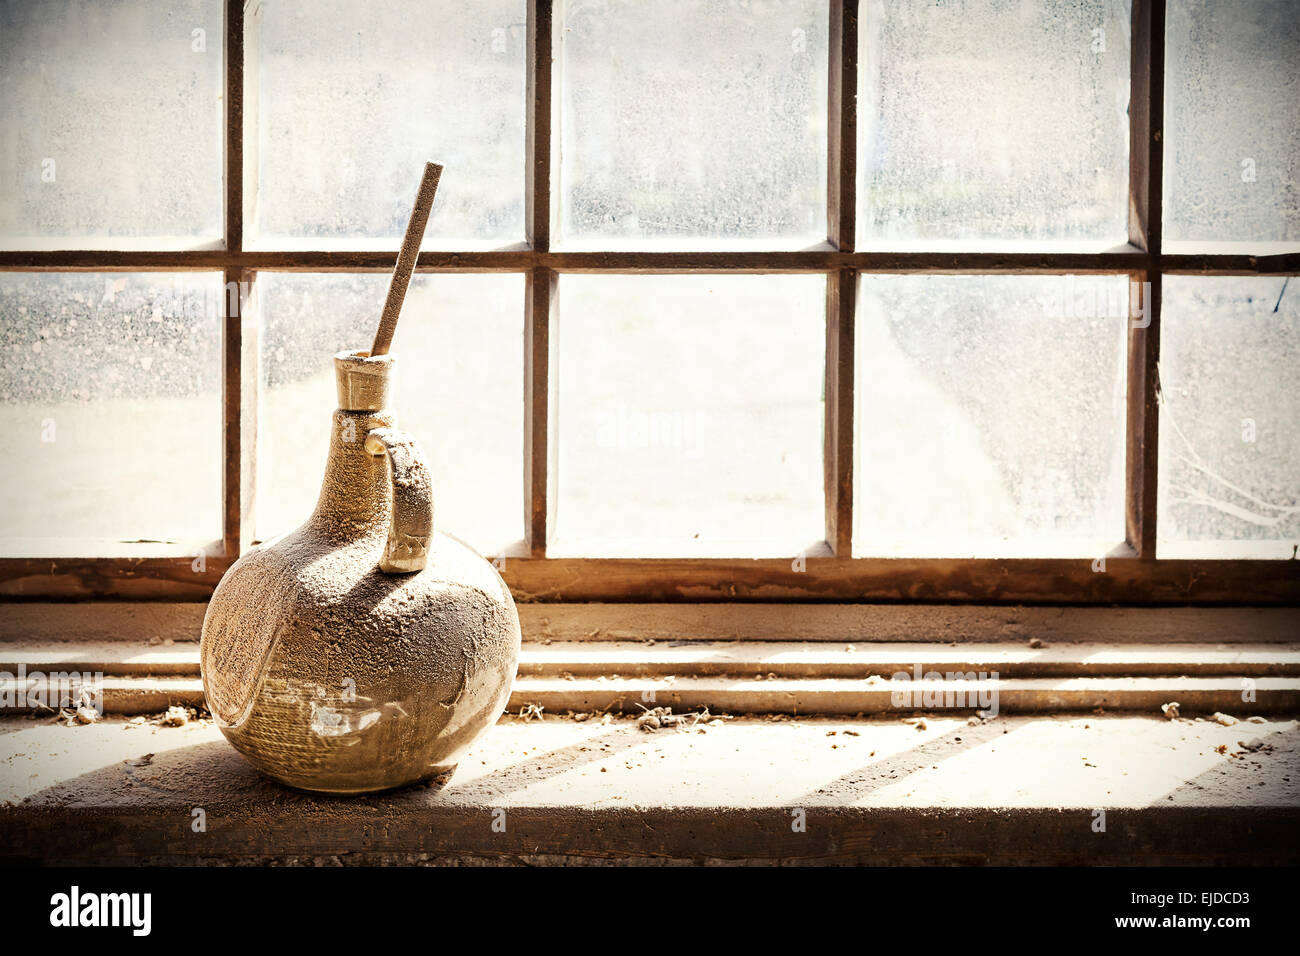 Retro filtered rustic background, old vase on grungy window. Stock Photo